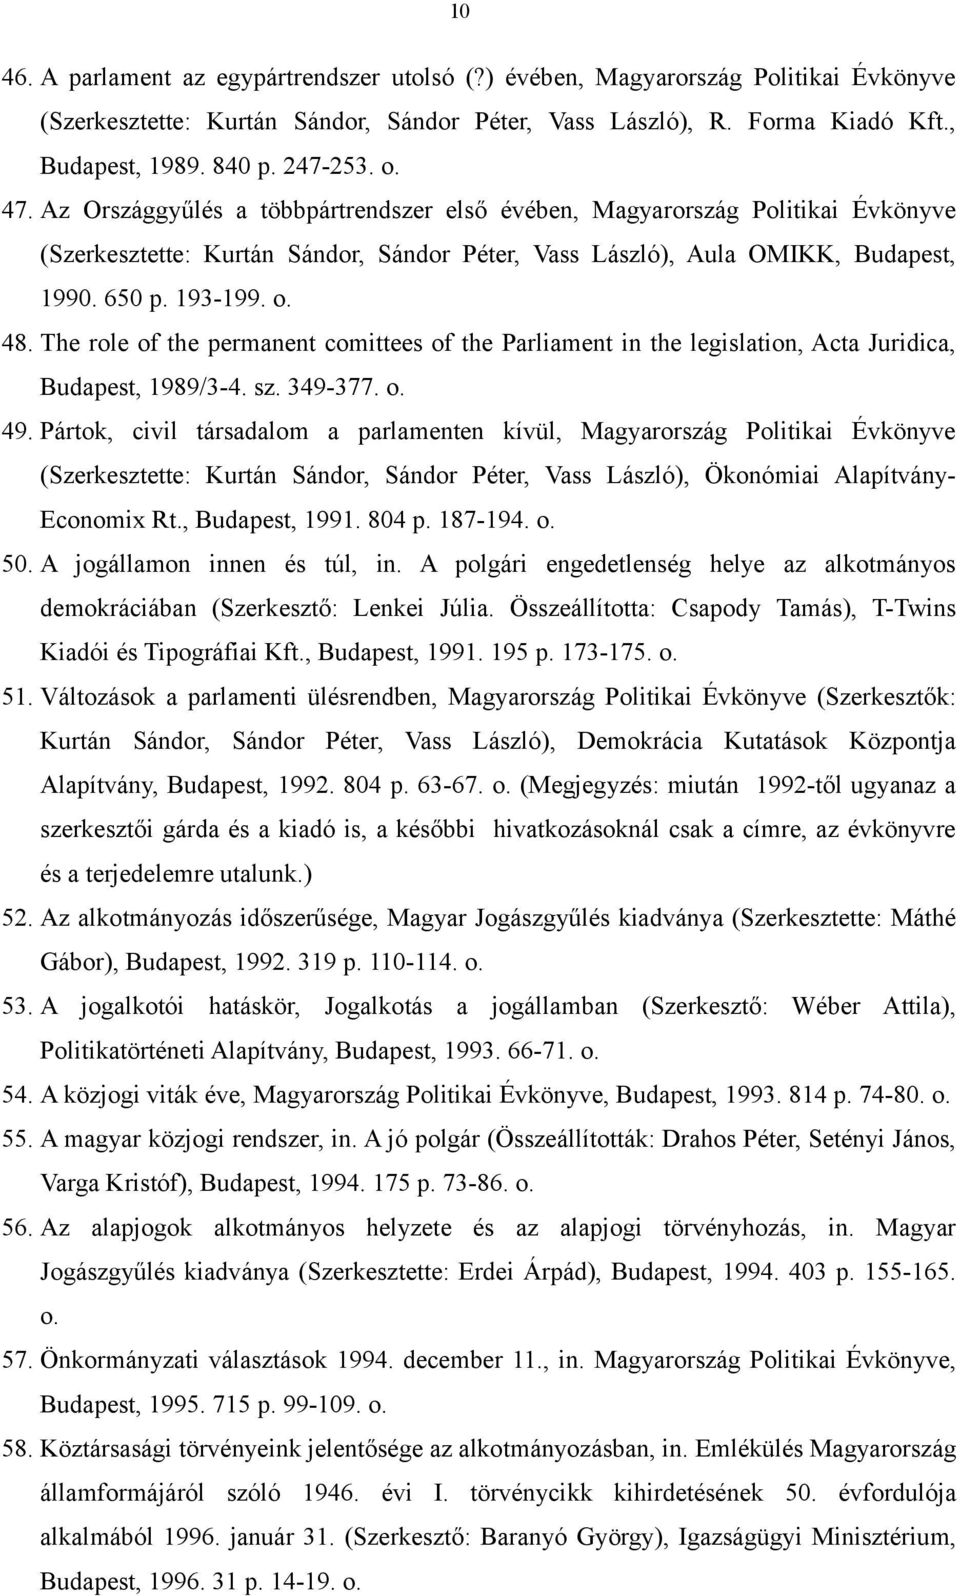 The role of the permanent comittees of the Parliament in the legislation, Acta Juridica, Budapest, 1989/3-4. sz. 349-377. o. 49.